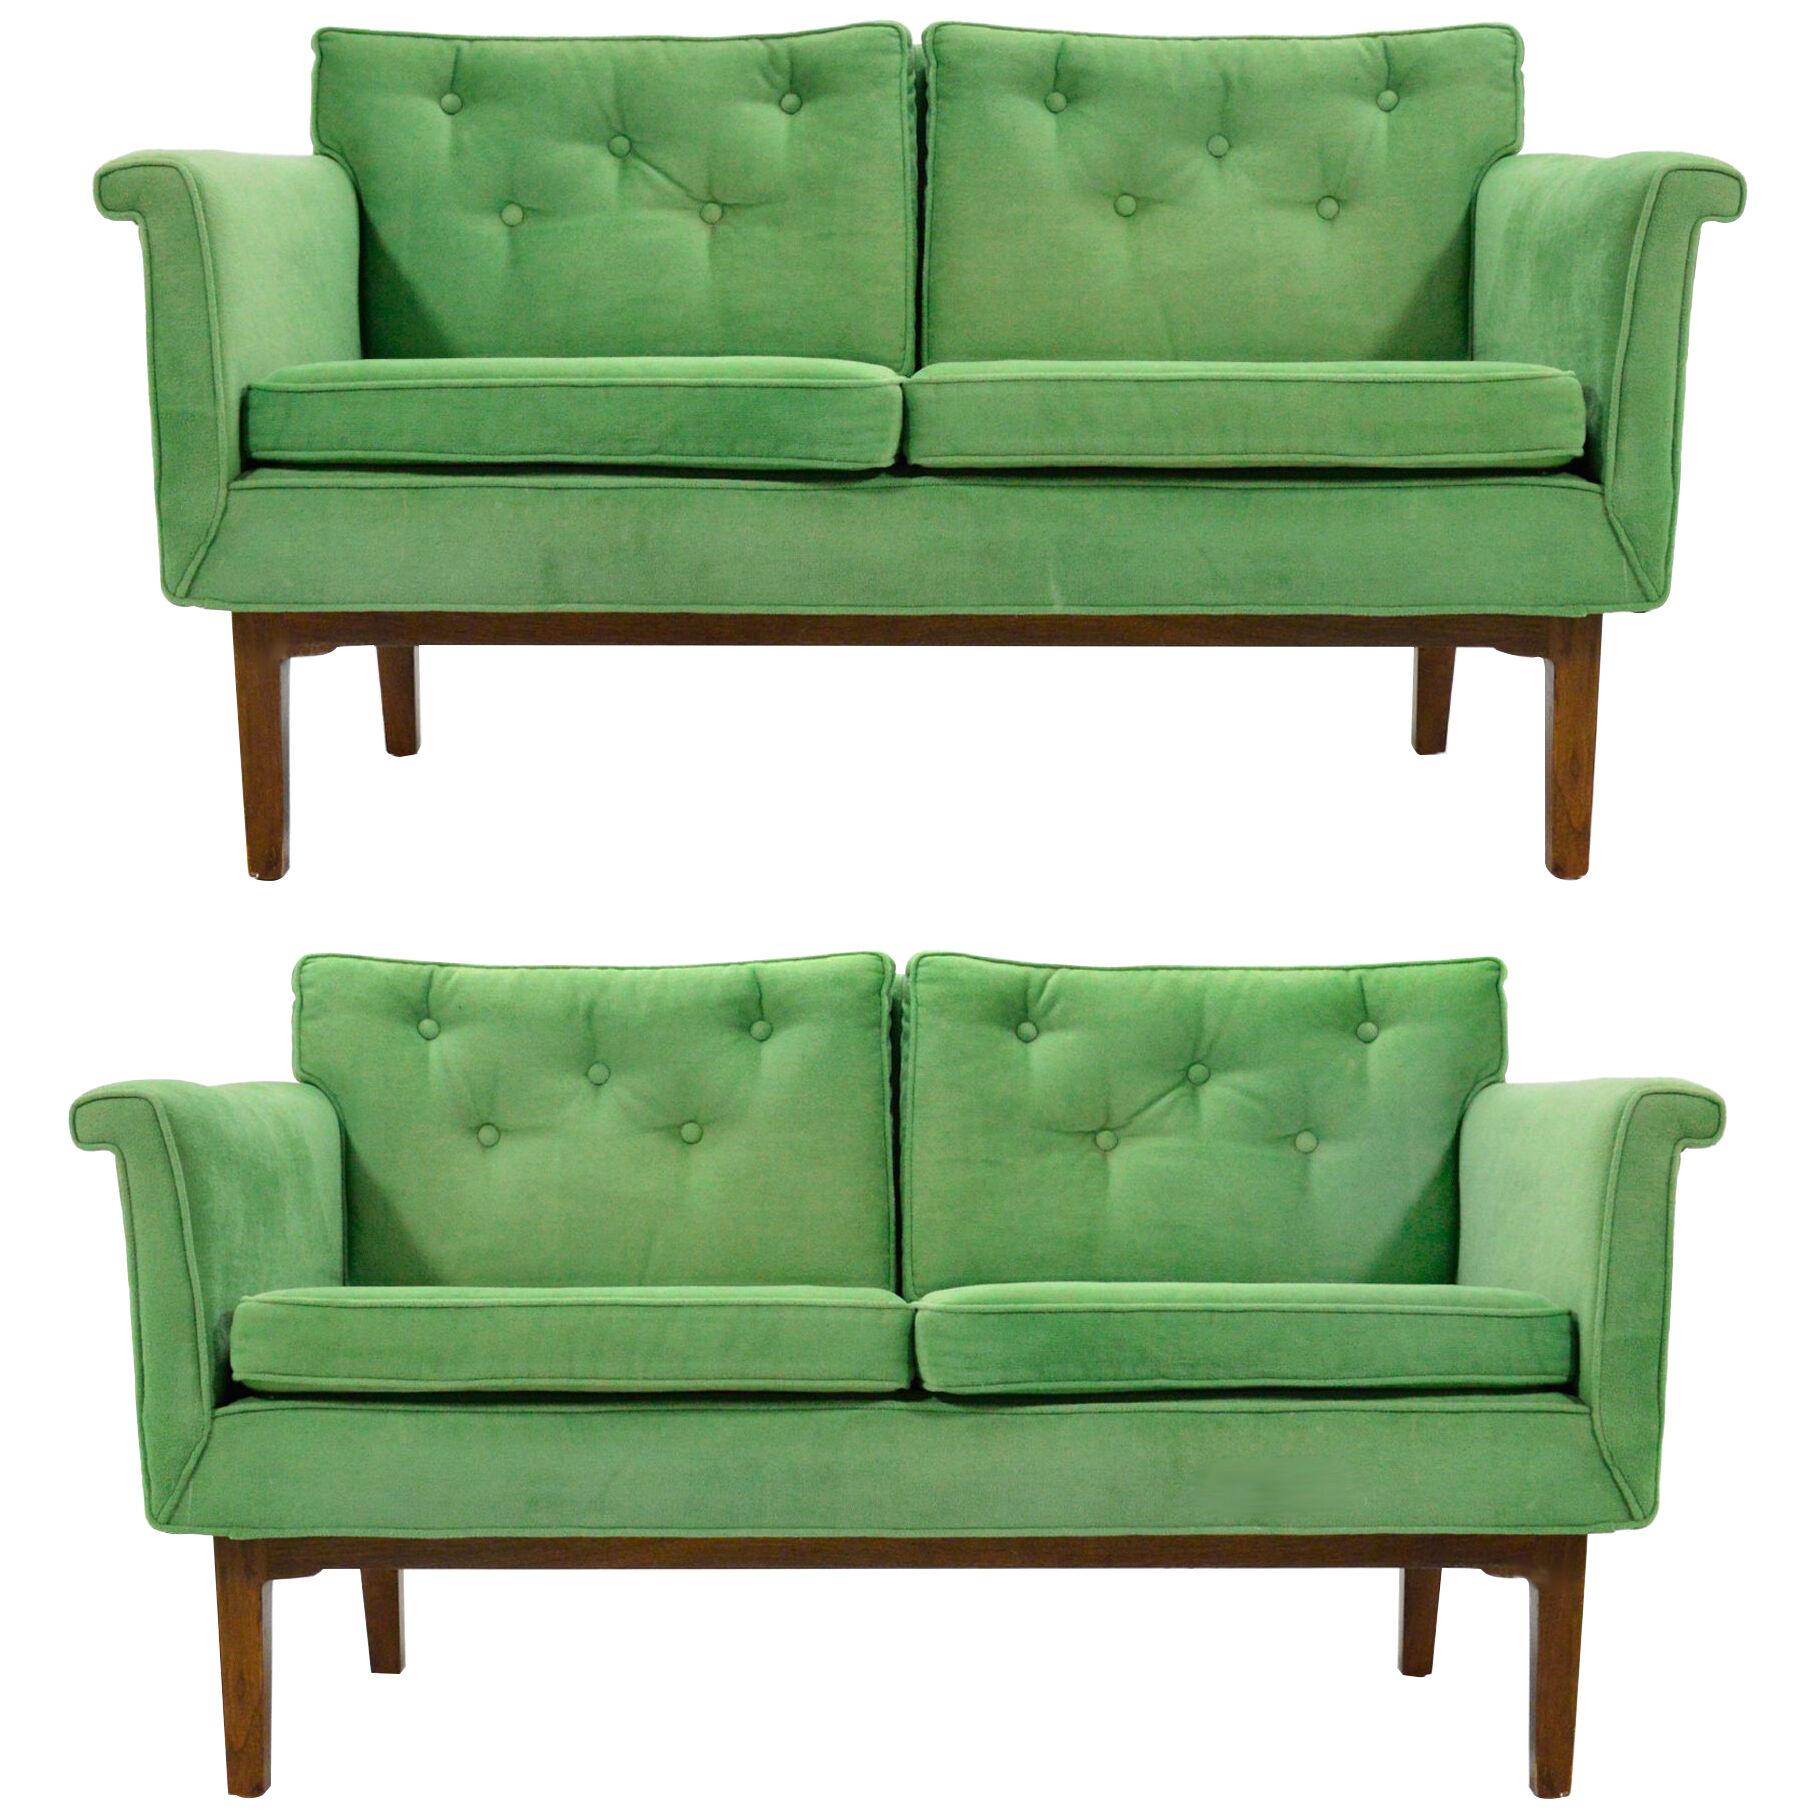 Edward Wormley Pair of Sofas / Settees